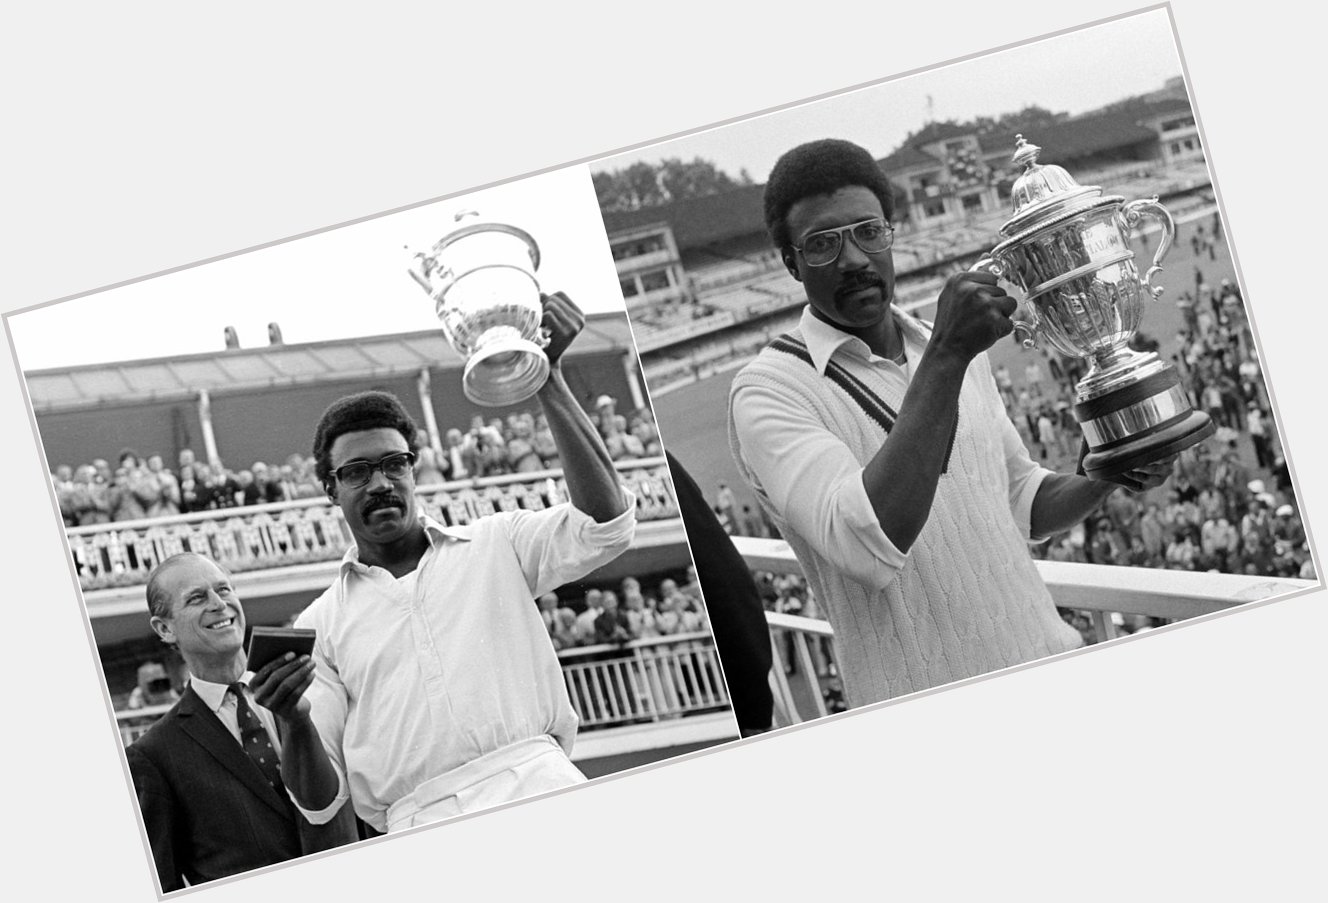 1975: 1979: Happy 73rd birthday to the man who led to two Cricket World Cup titles, Clive Lloyd! 